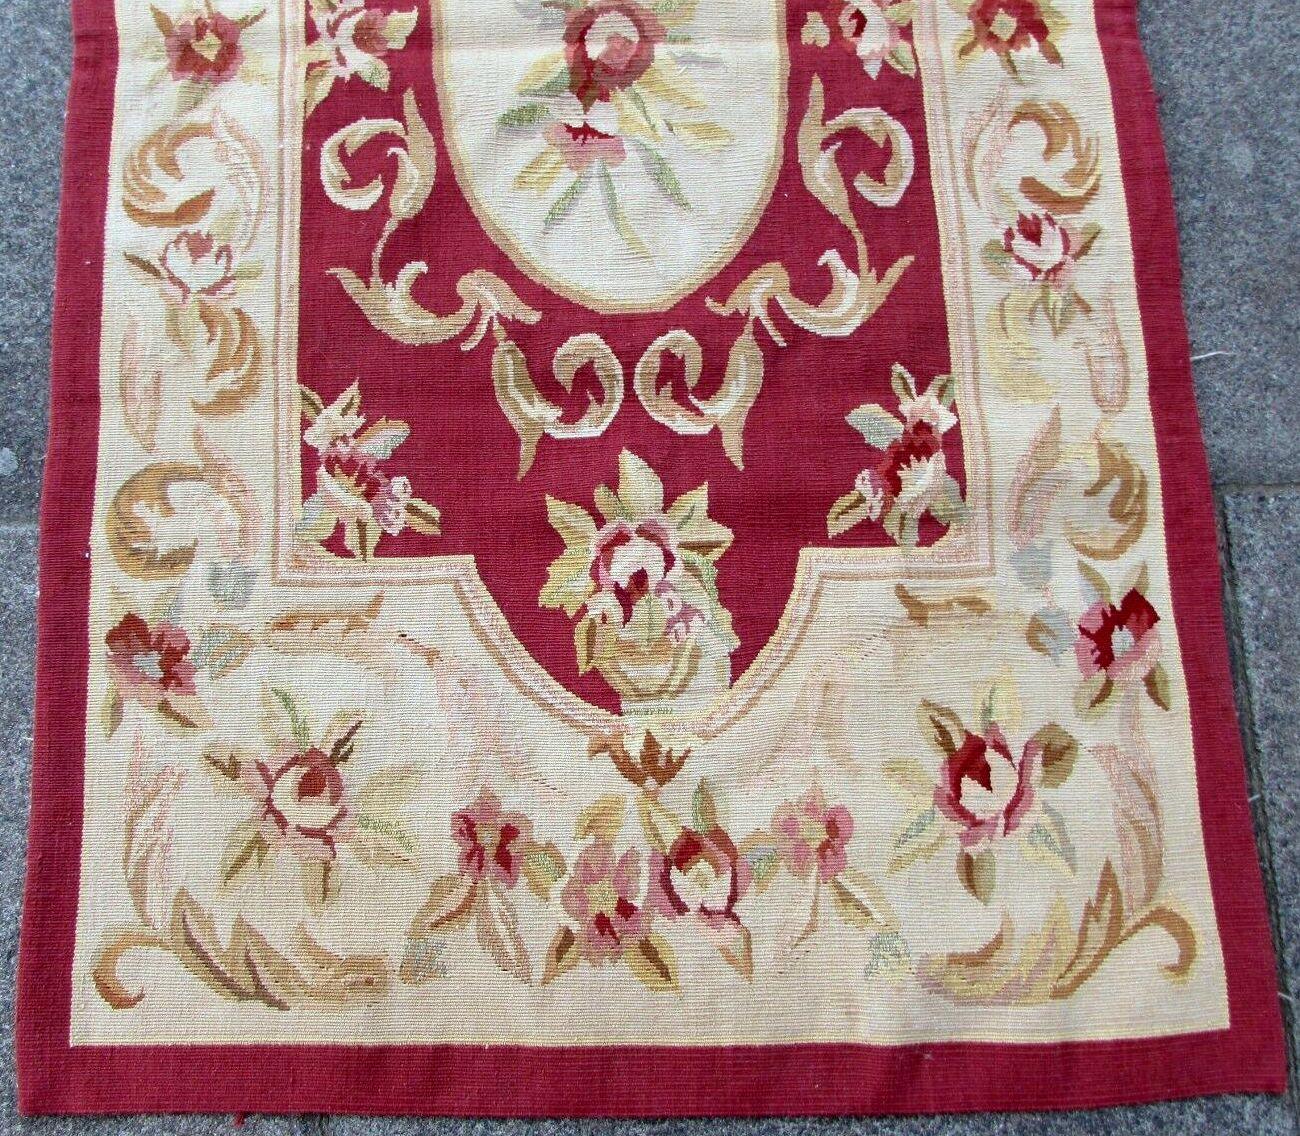 Handmade vintage classic French Aubusson rug. It is from the end of the 20th century in original good condition.

- Condition: original good,

- circa 1980s,

- Size: 2.7' x 4.10' (79cm x 145cm),

- Material: wool,

- Country of origin: